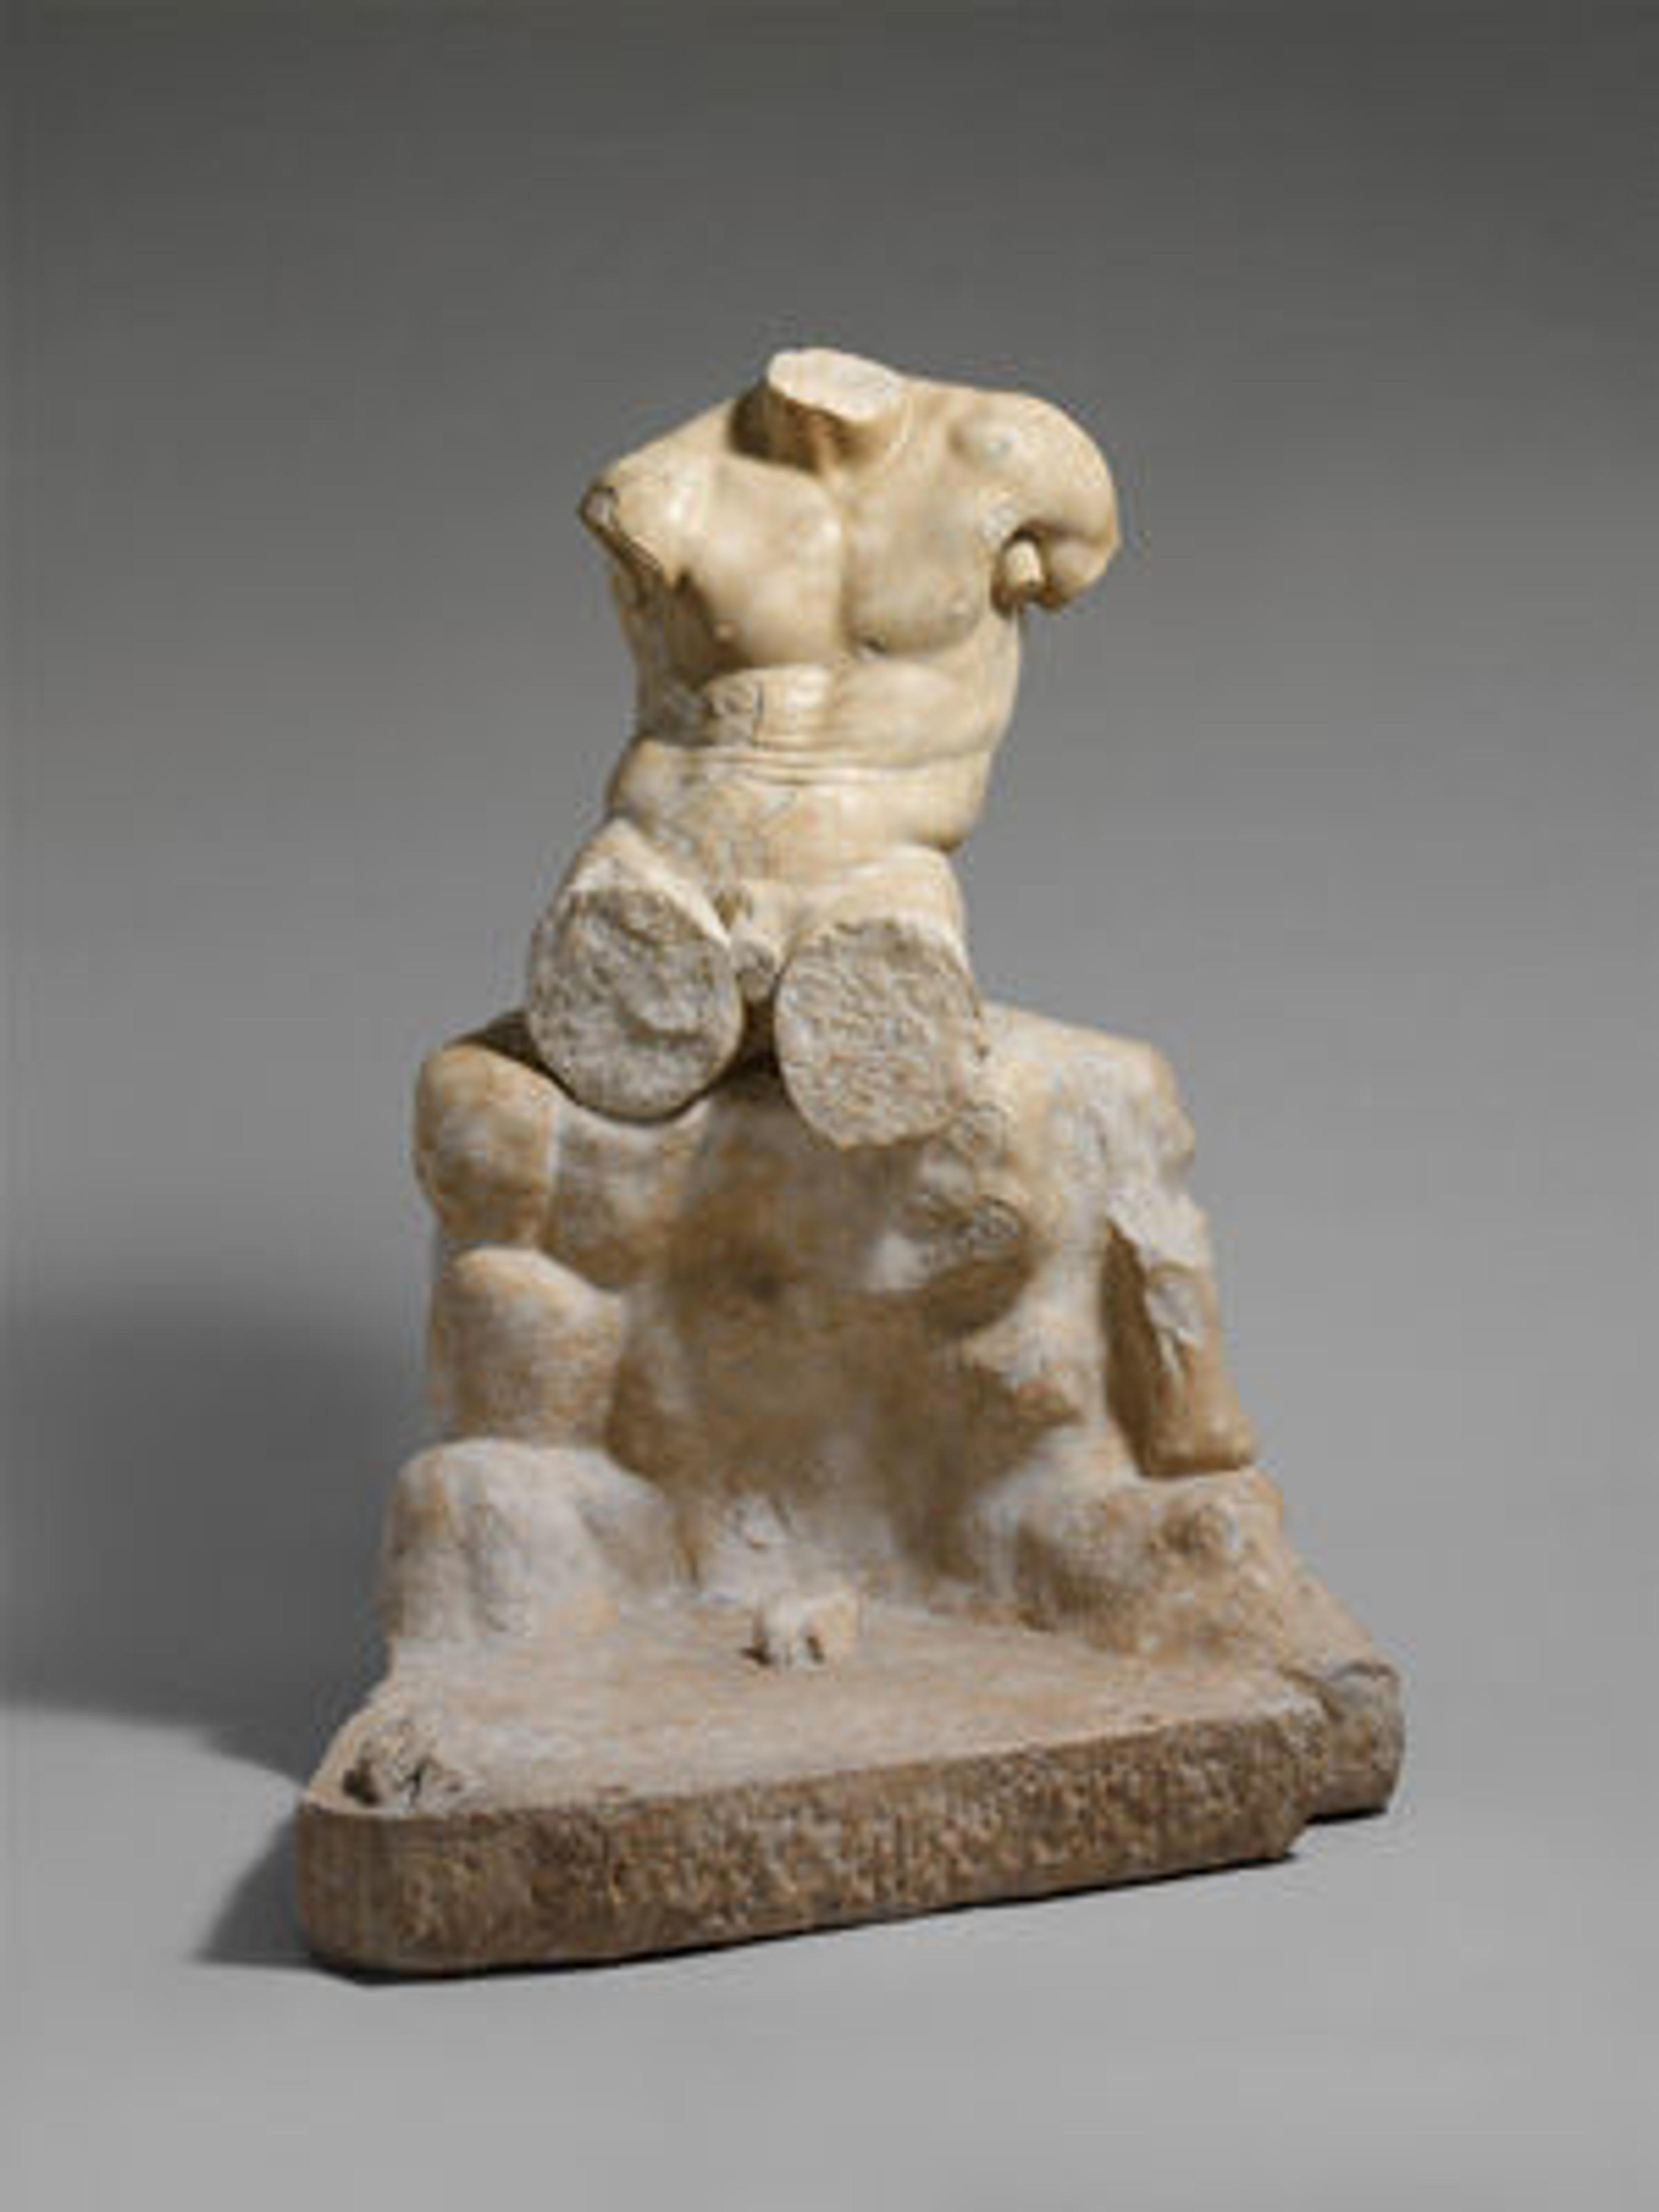 Statue of Herakles Seated on a Rock, Roman, Imperial period, 1st or 2nd century A.D., adaptation of a bronze statue attributed to Lysippos, marble.